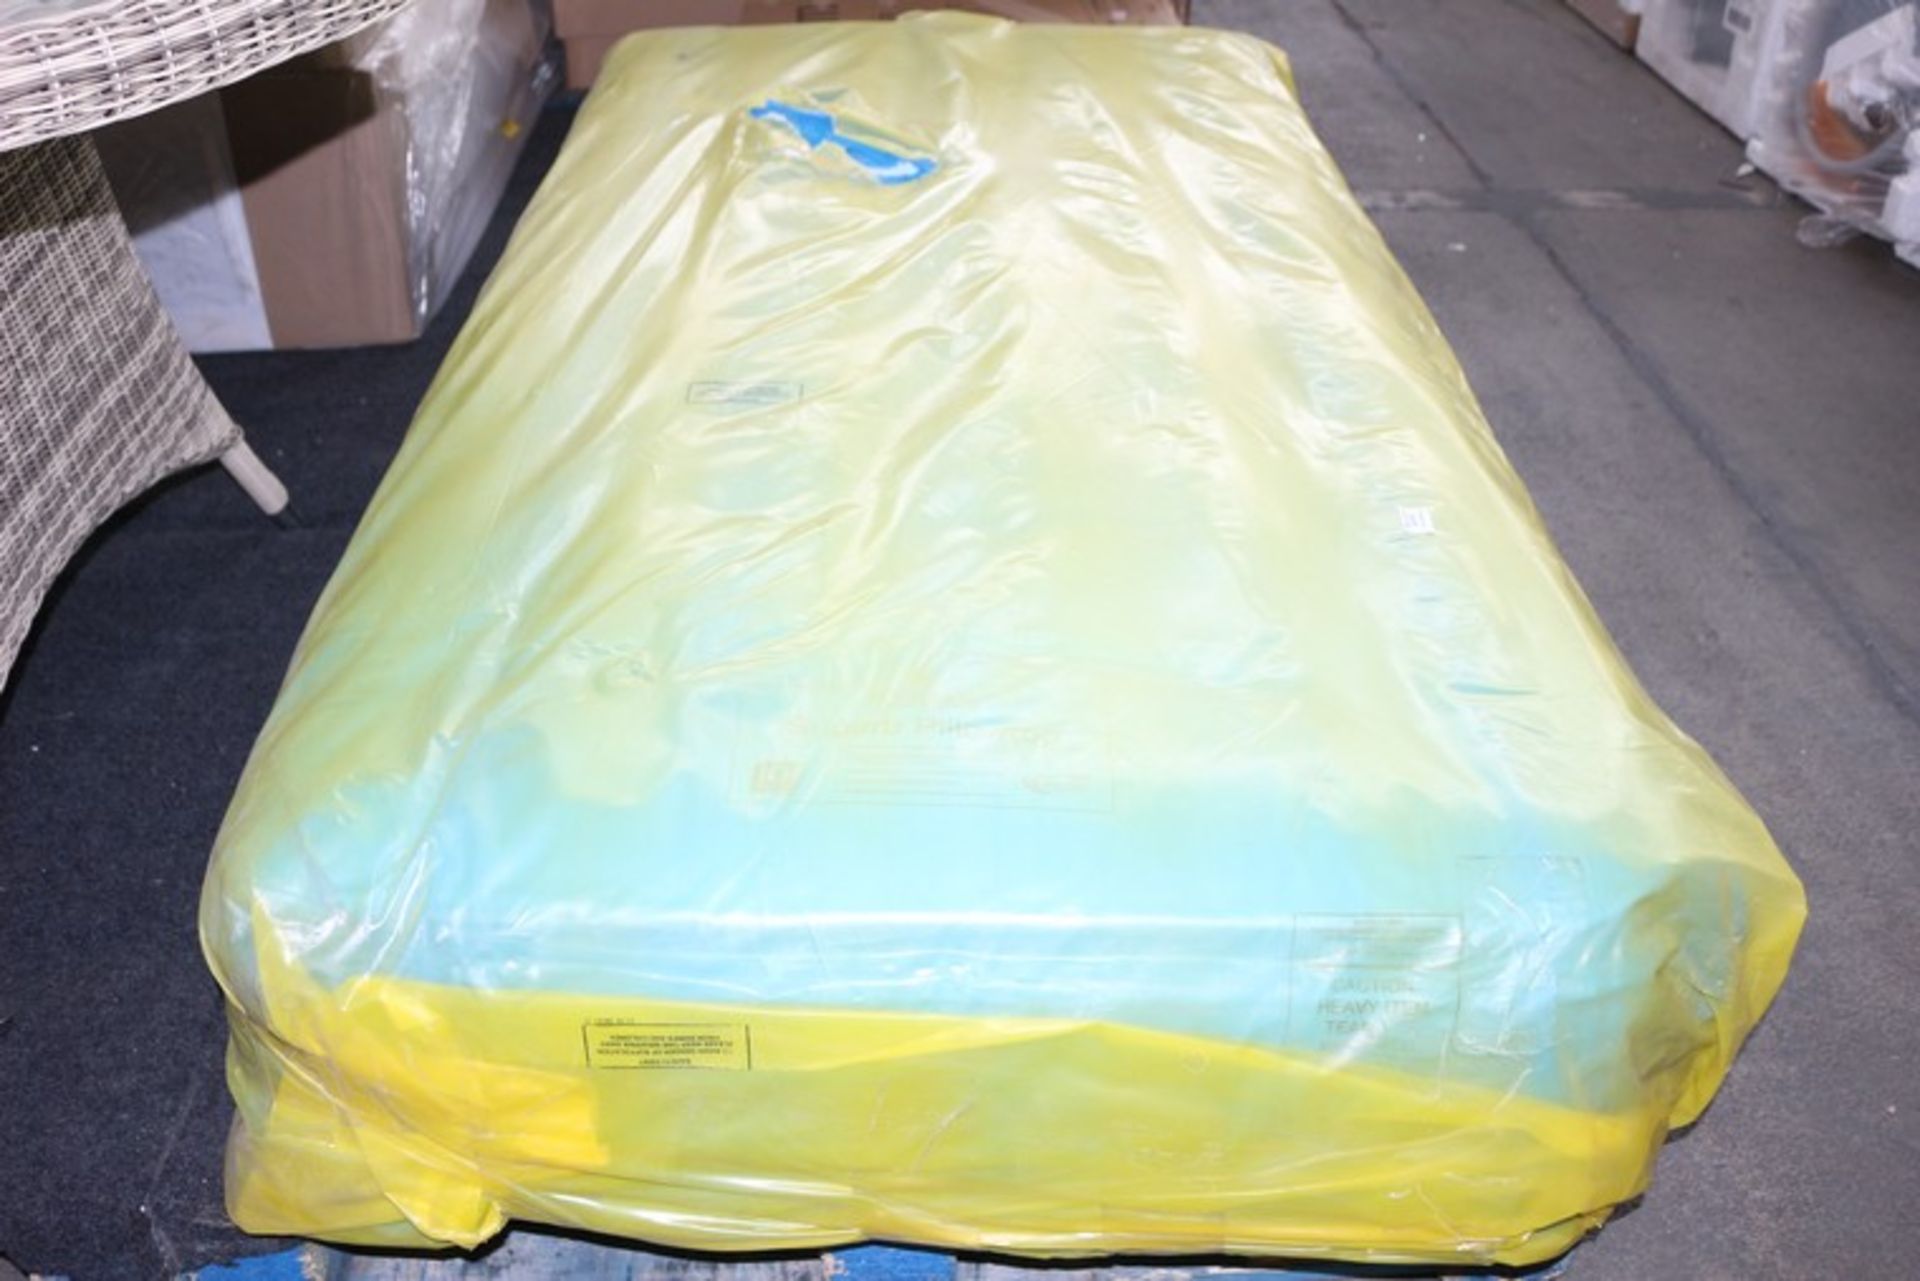 1 x 90CM HYPNOS SUPERB PILLOW TOP MATTRESS RRP £400 (4.7.17) *PLEASE NOTE THAT THE BID PRICE IS